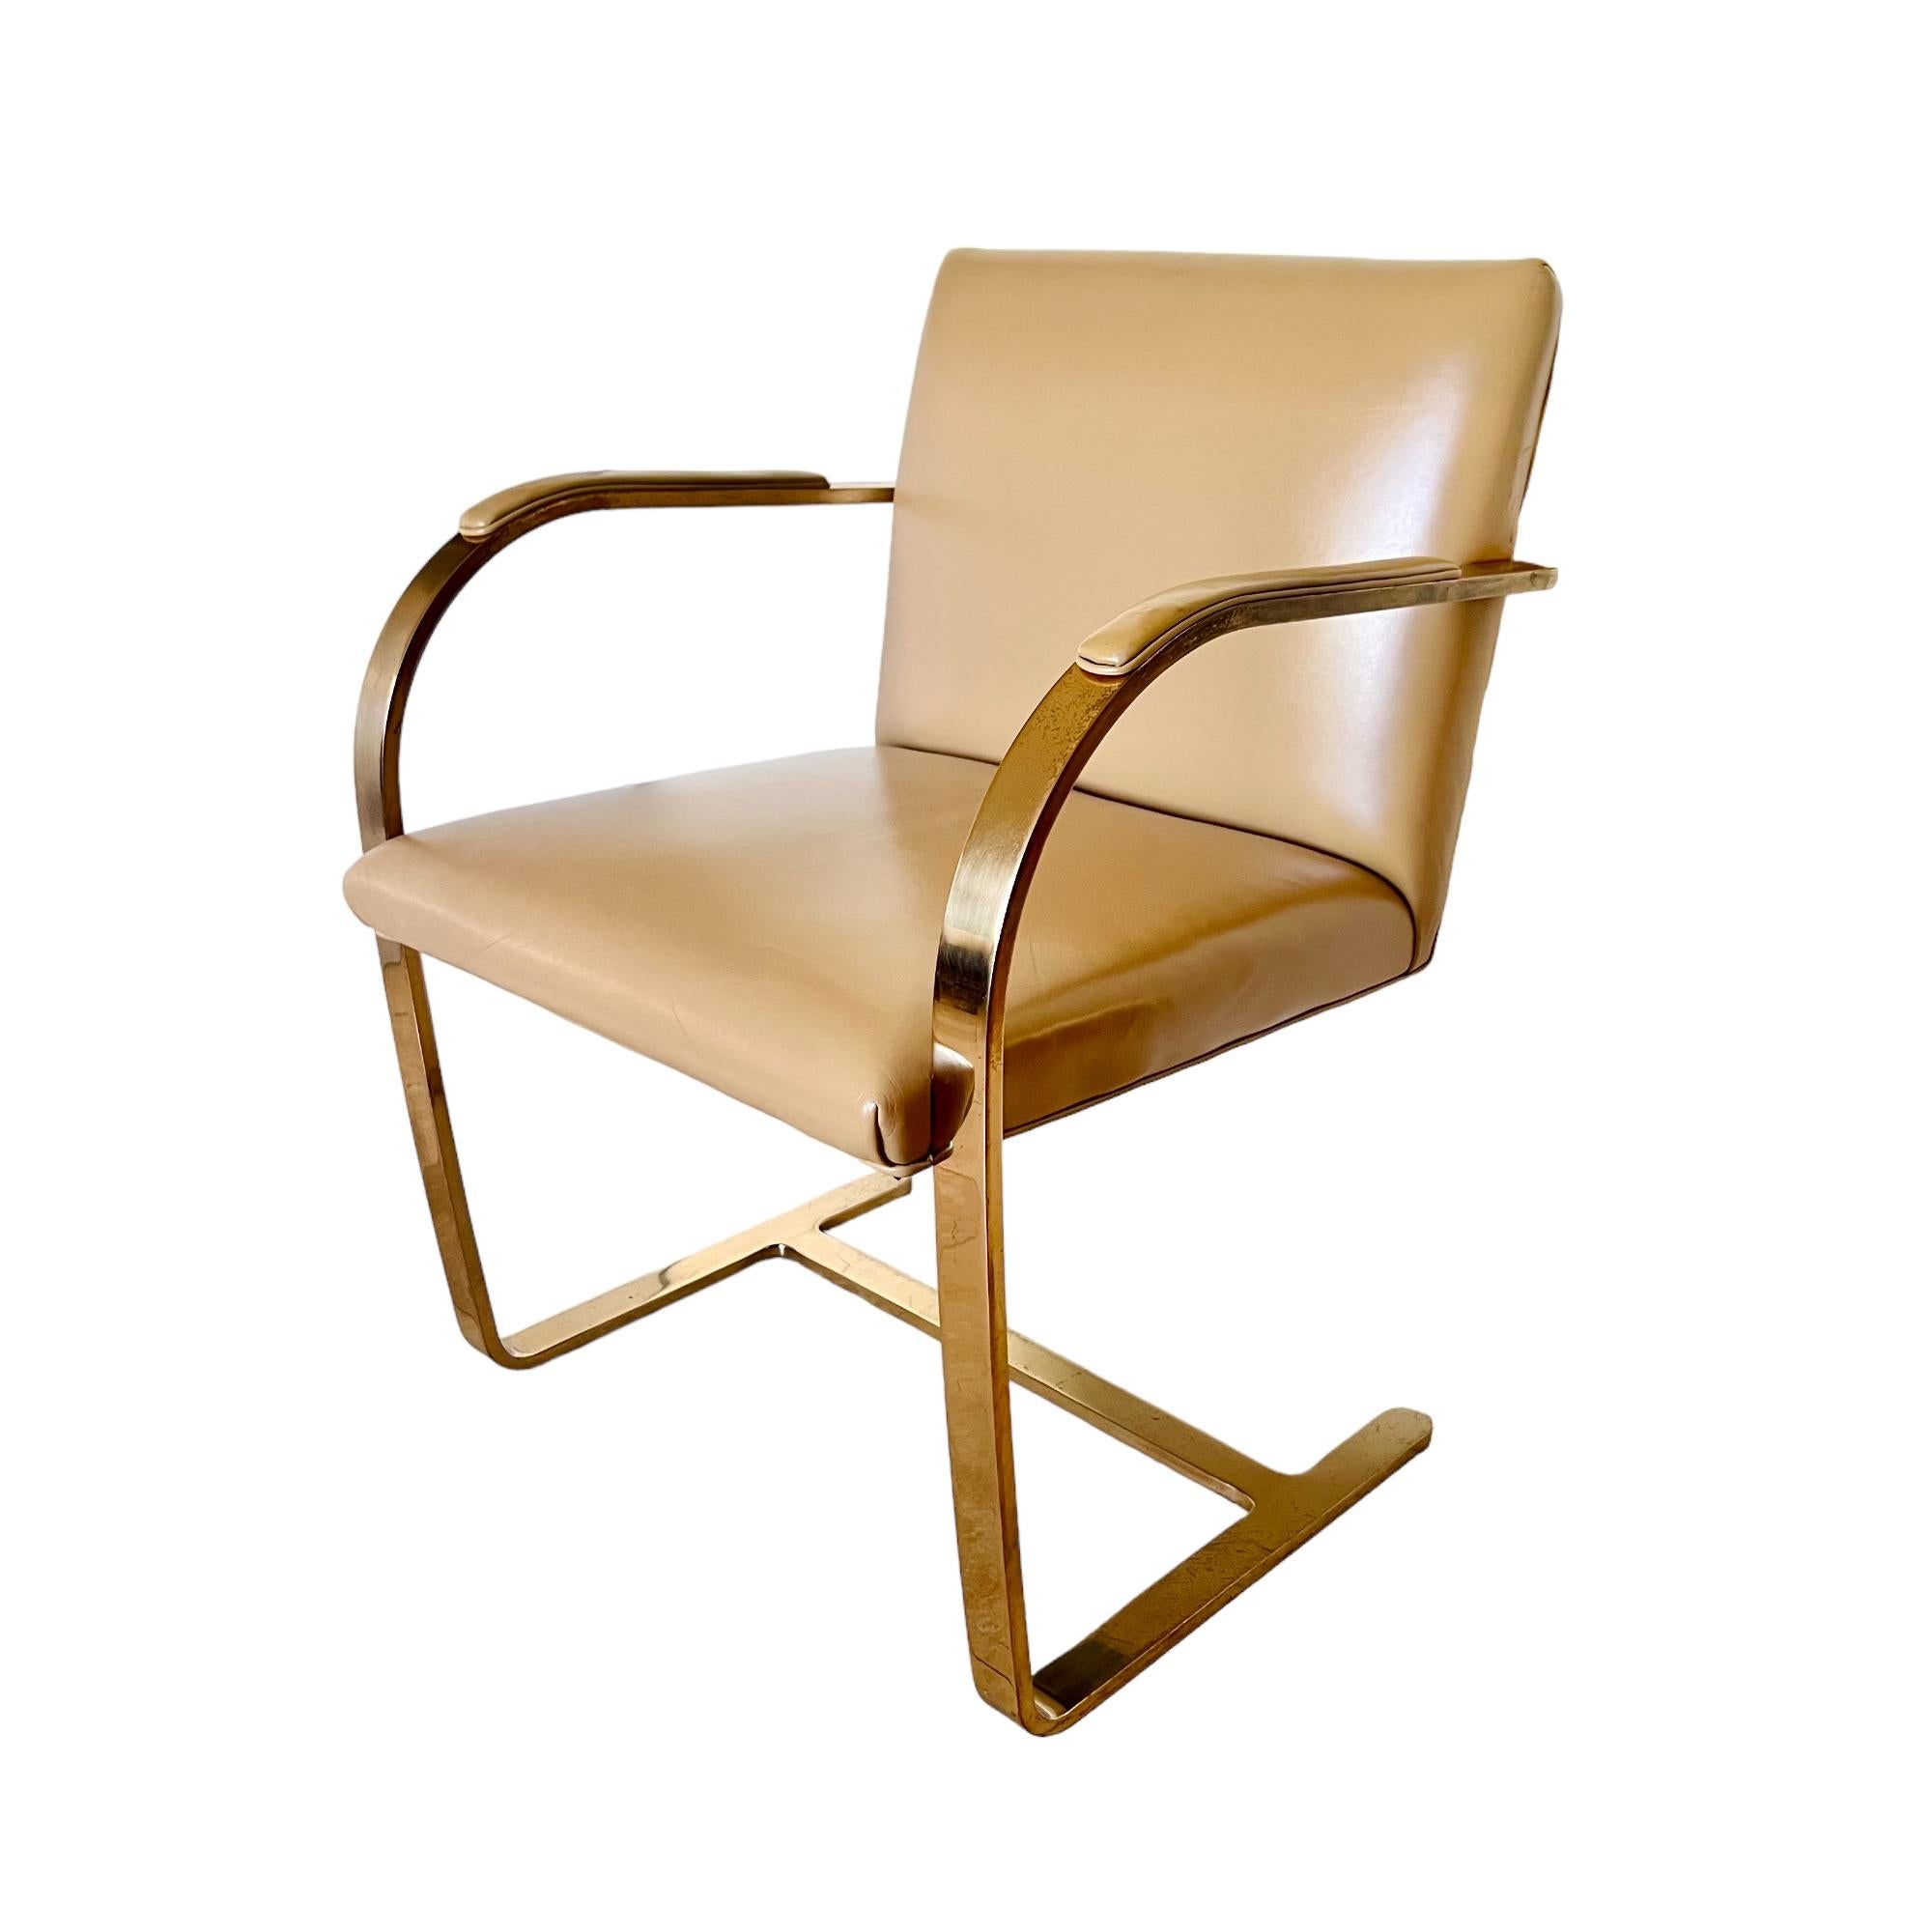 A vintage mid-century modern Brno flat bar armchair designed by Ludwig Mies van der Rohe and produced by Interior Crafts. Special commission solid brass frame with tan leather chair back, seat and armrest pads.

Dimensions: 23